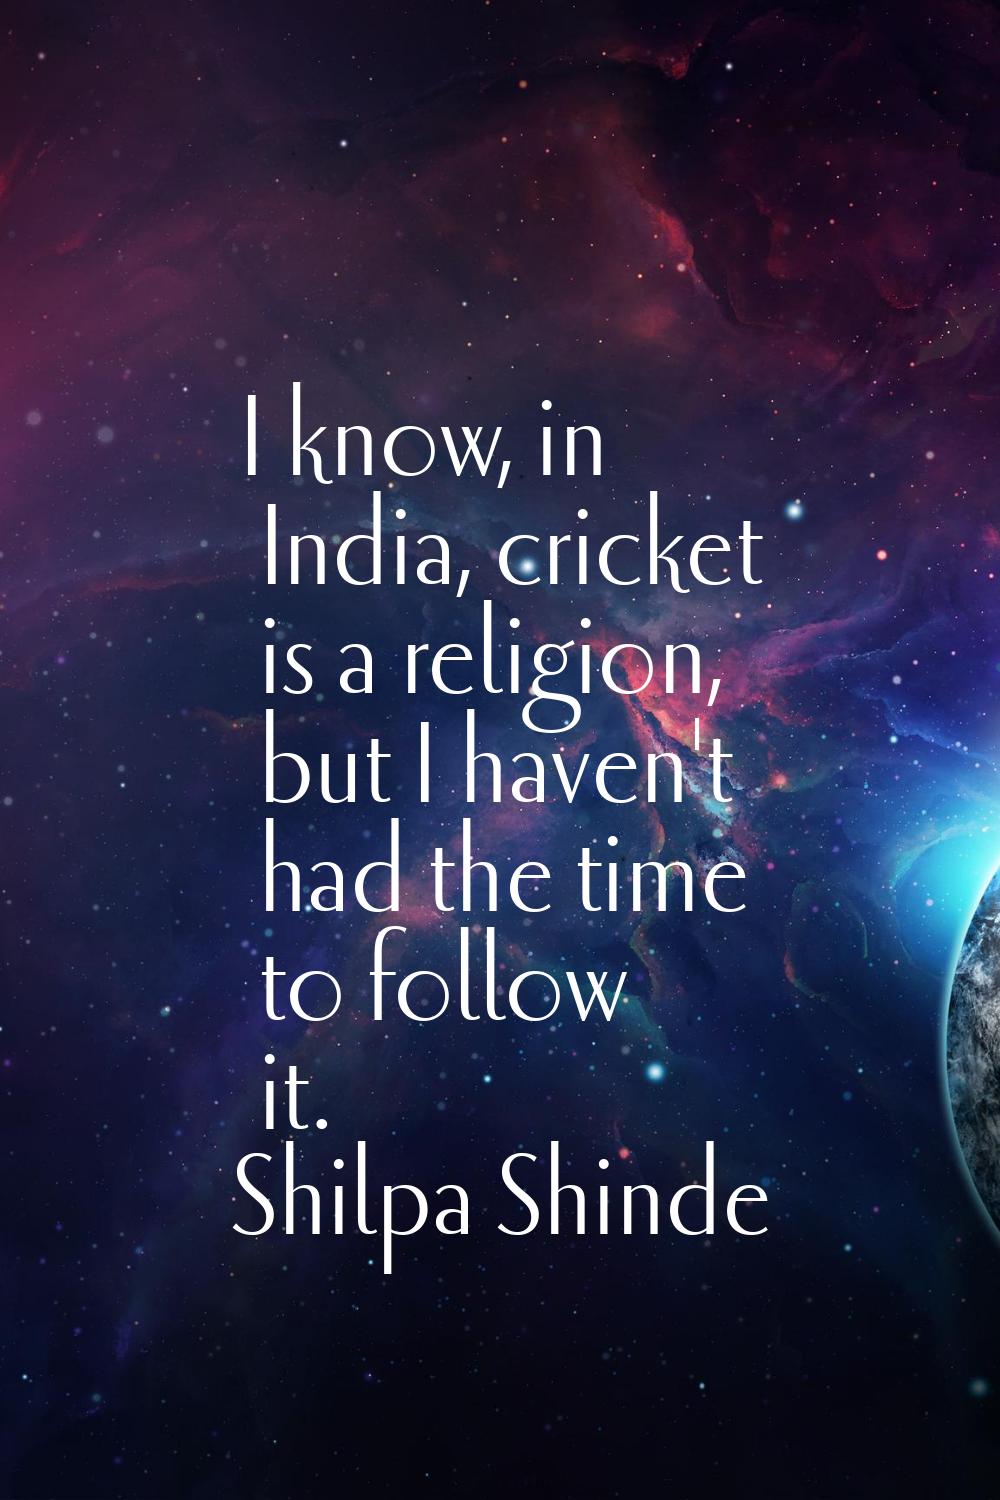 I know, in India, cricket is a religion, but I haven't had the time to follow it.